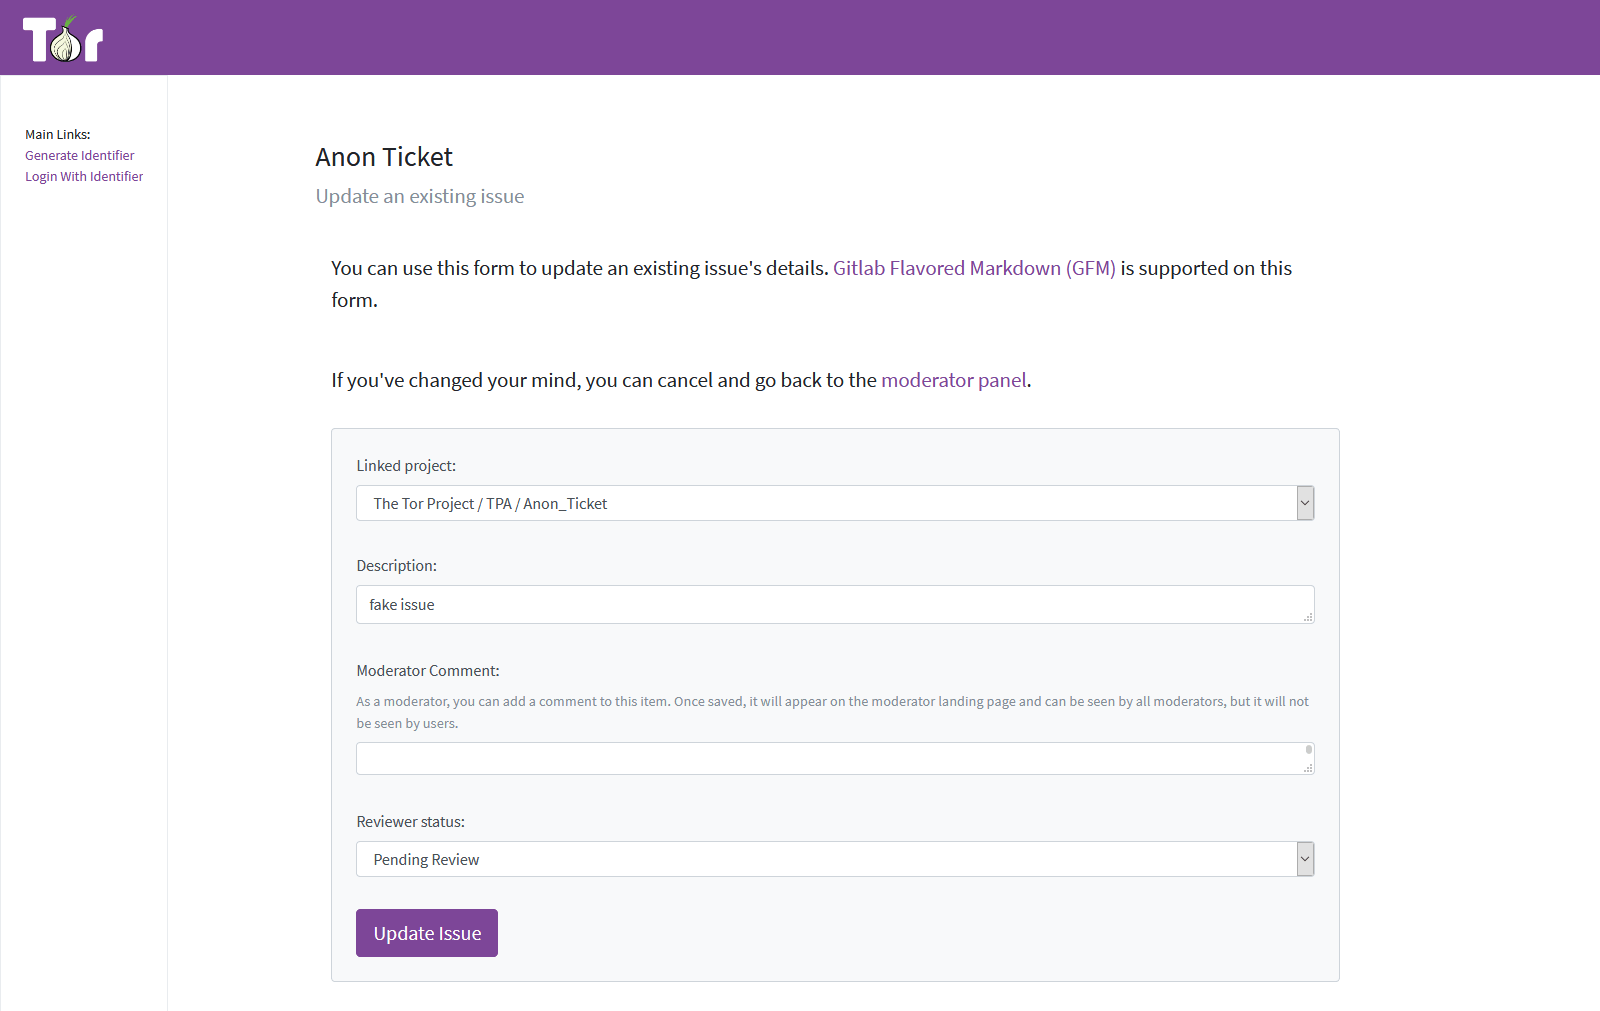 A screenshot of the view to update a moderator note, displaying a form with fields that the moderator can update, such as title, body, reviewer status. Moderators can also a mod-specific comment.